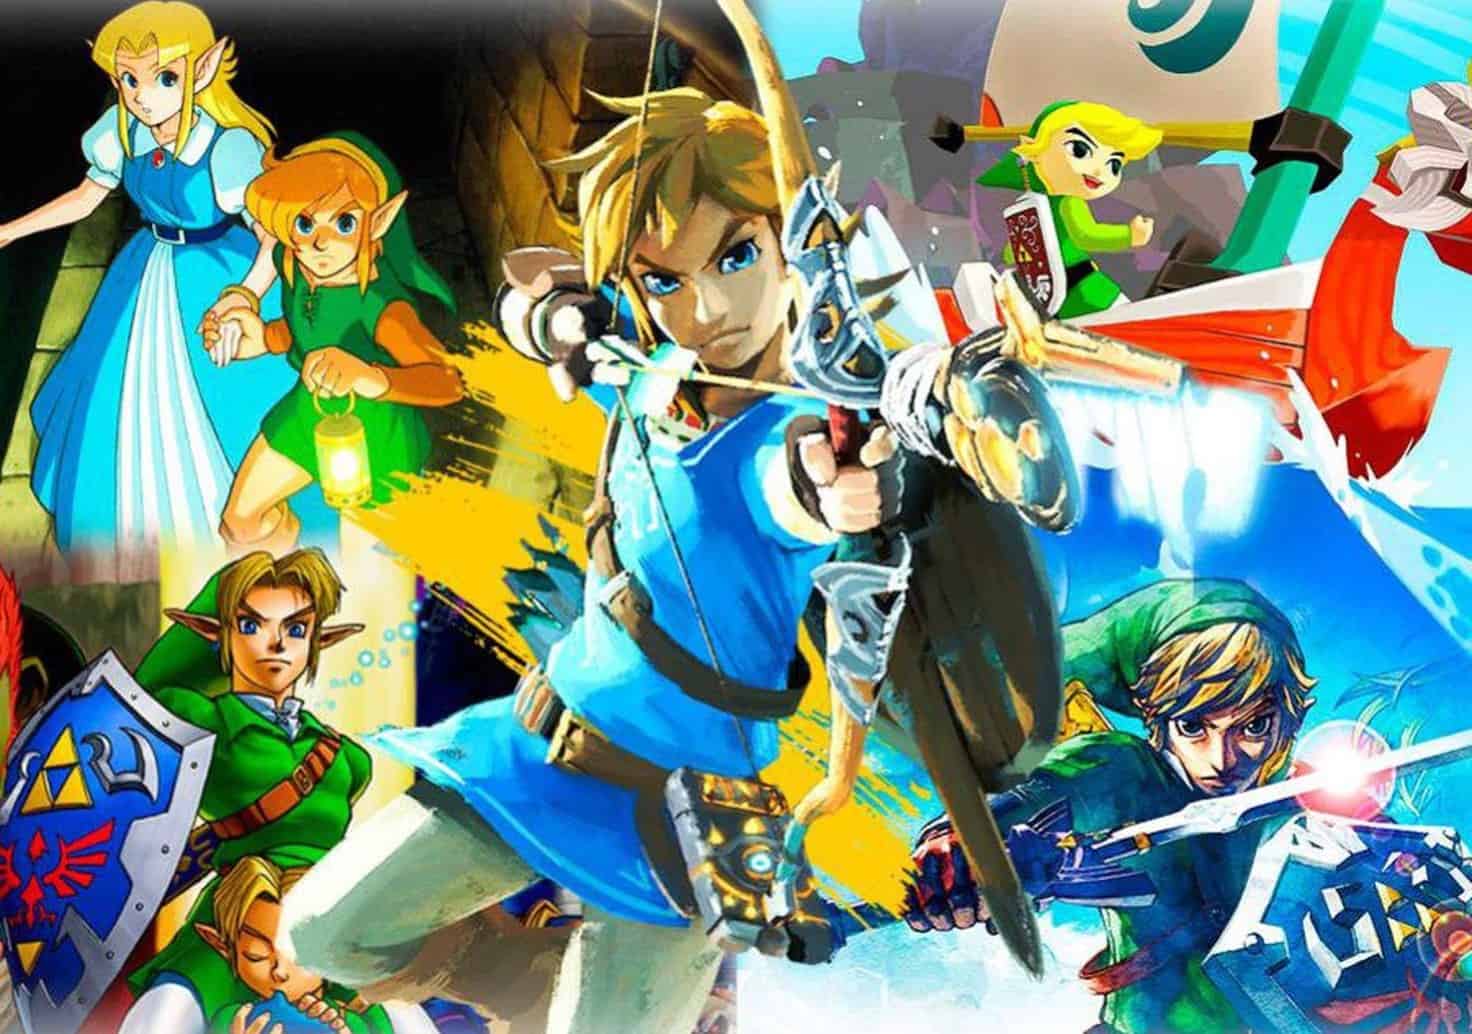  The Legend of Zelda: A Link to the Past (Renewed